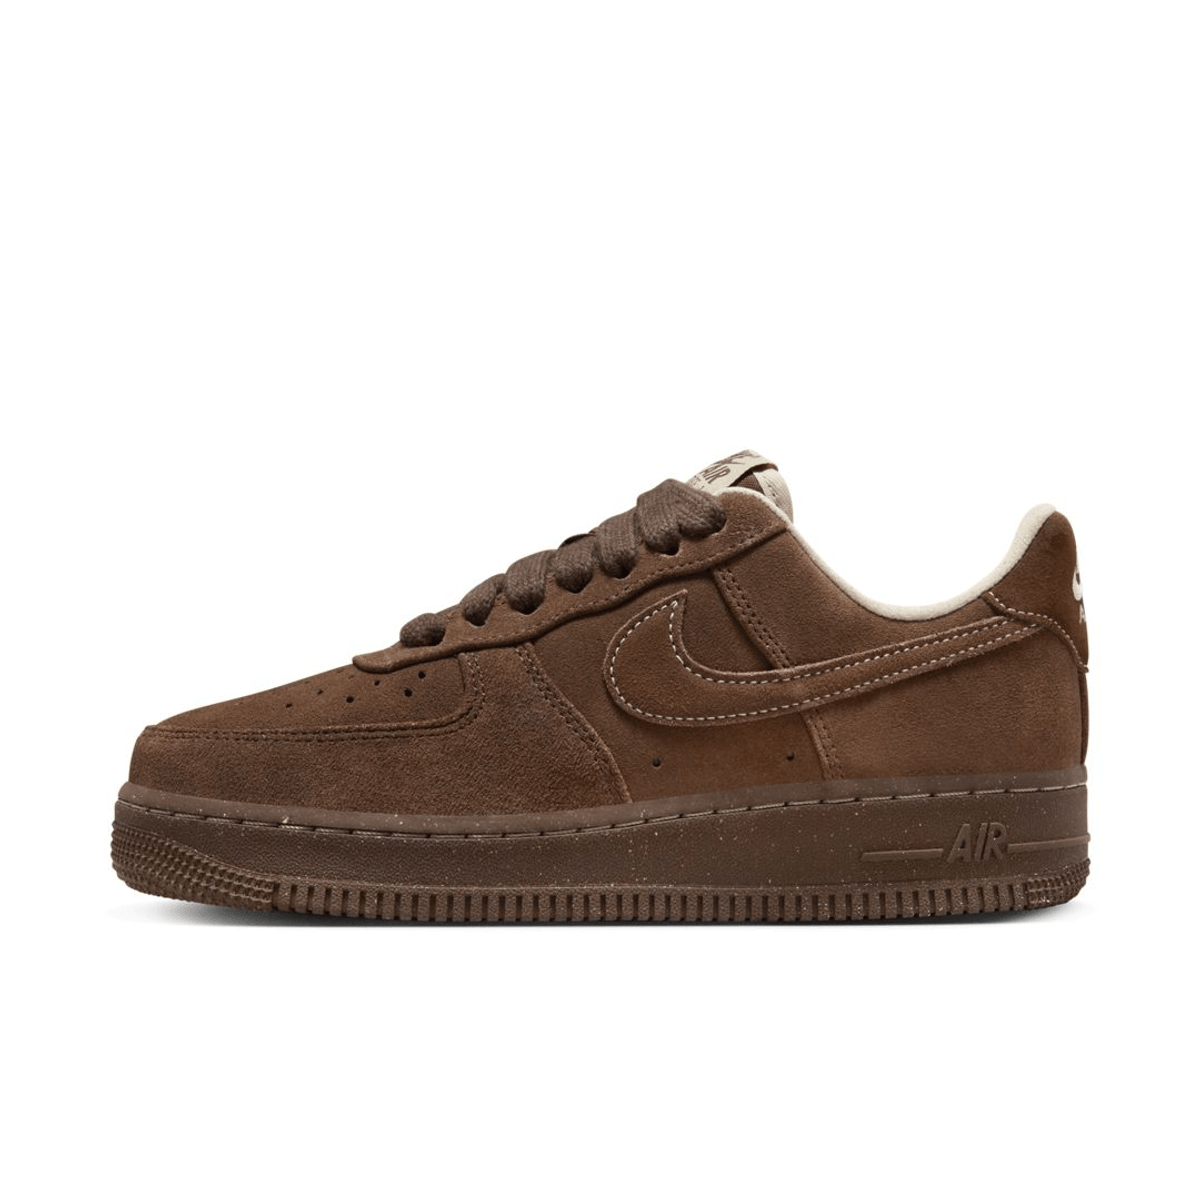 First Look at the Nike Air Force 1 Low "Cacao Wow"